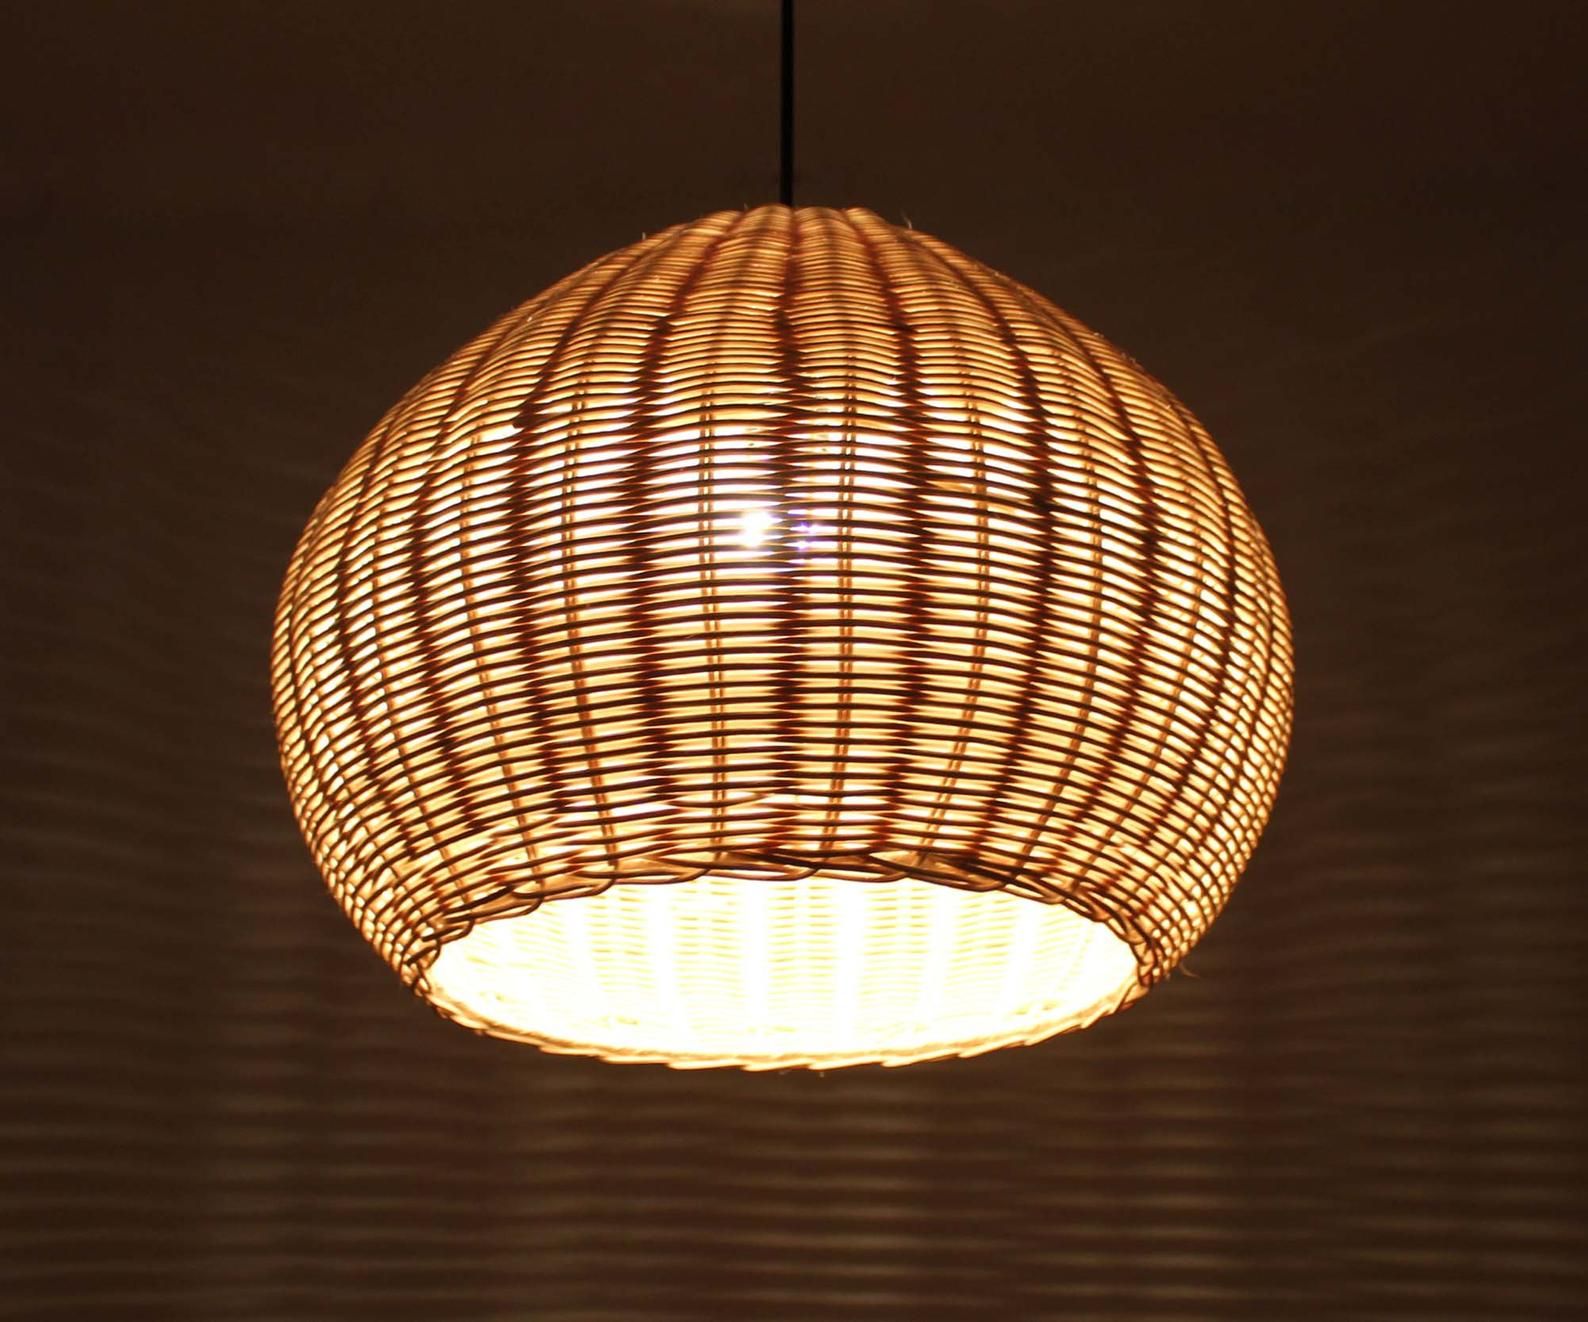 Rattan Lighting Trend 2022: Why We Should Decorate With Rattan